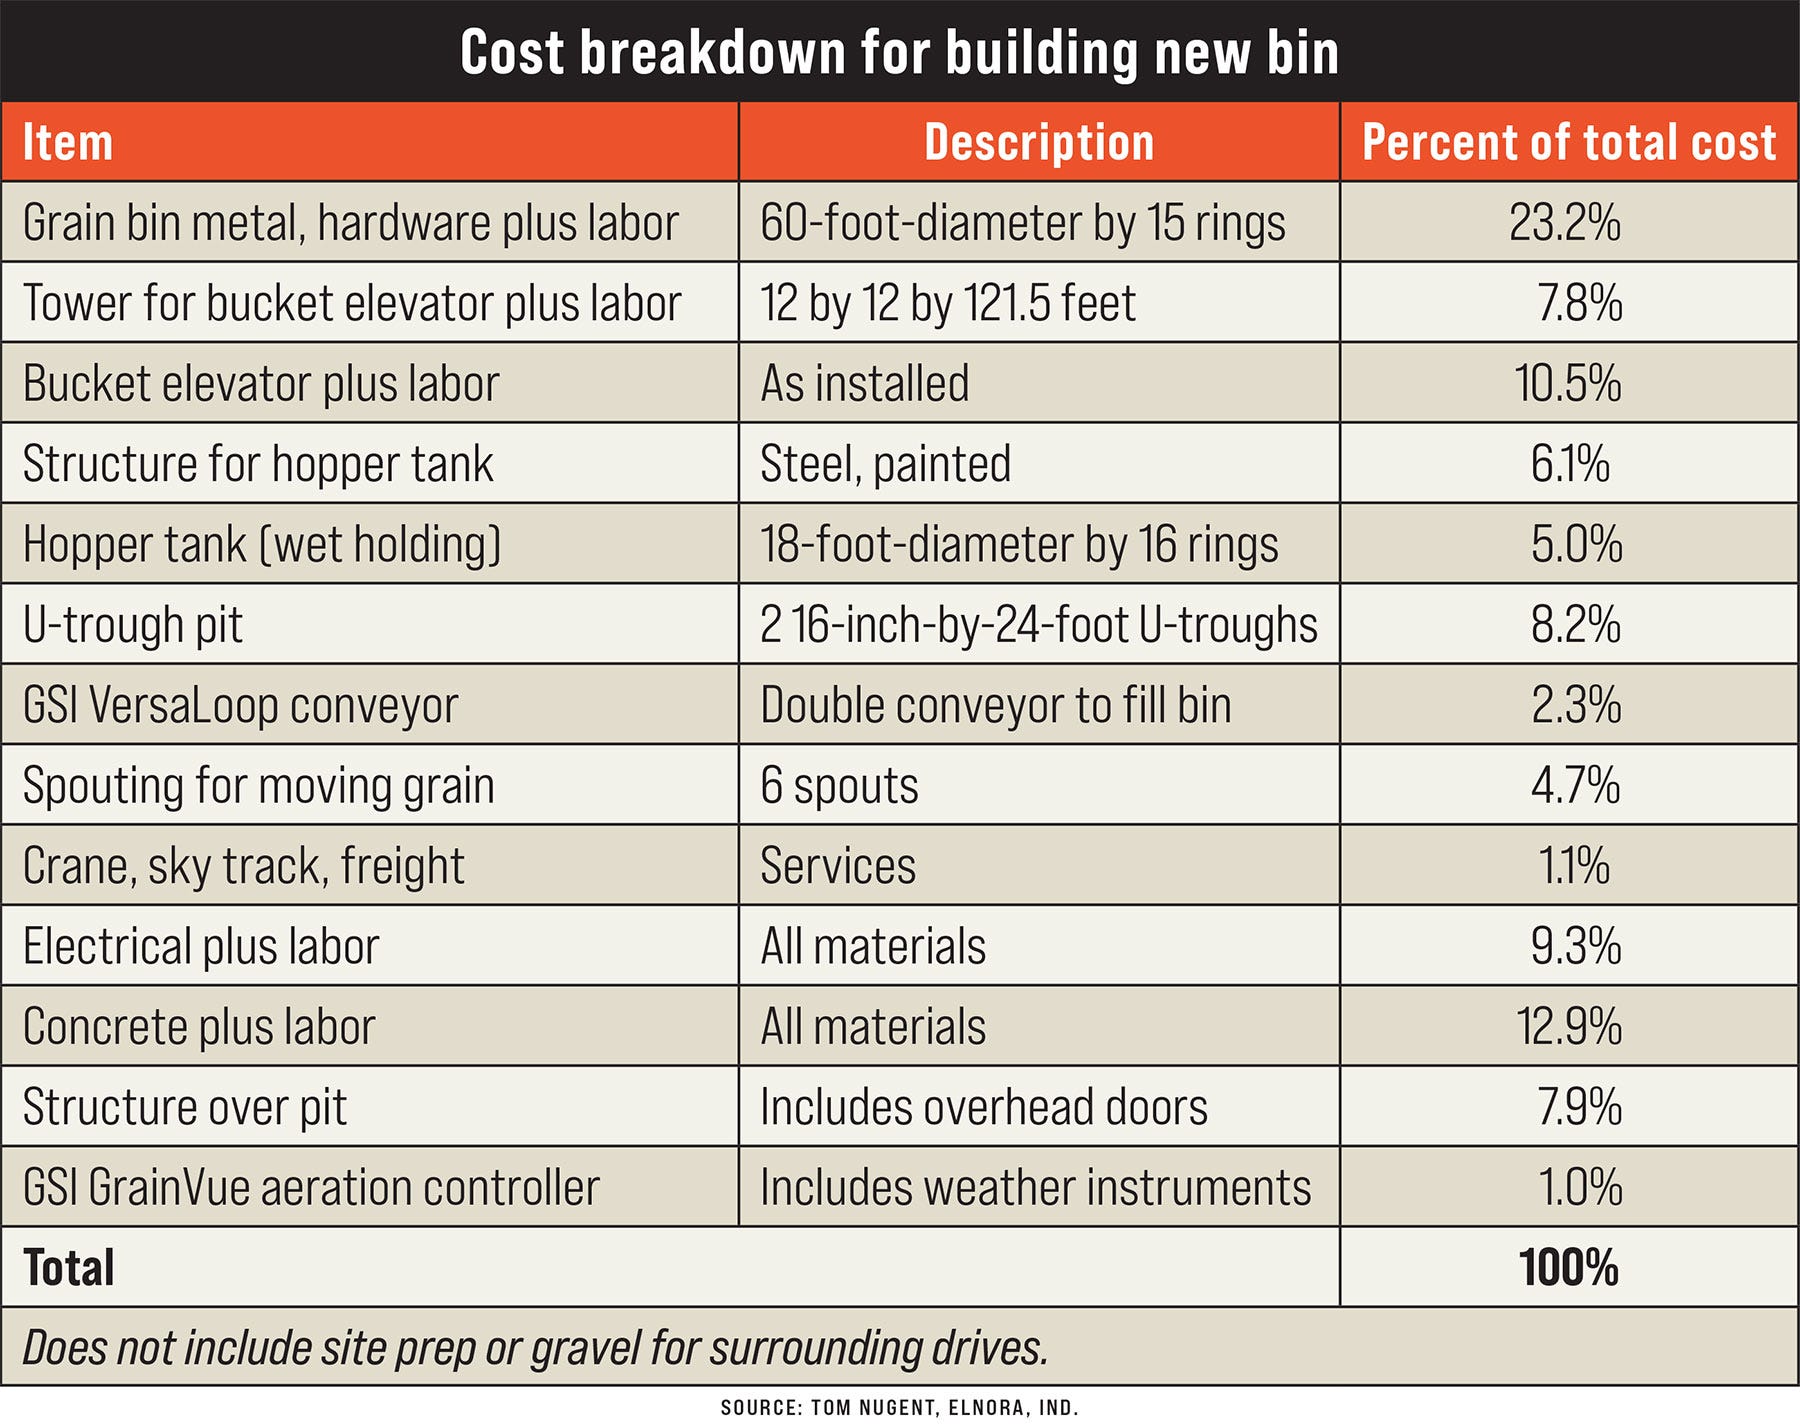 A graphic table outlining the cost breakdown for building a new bin